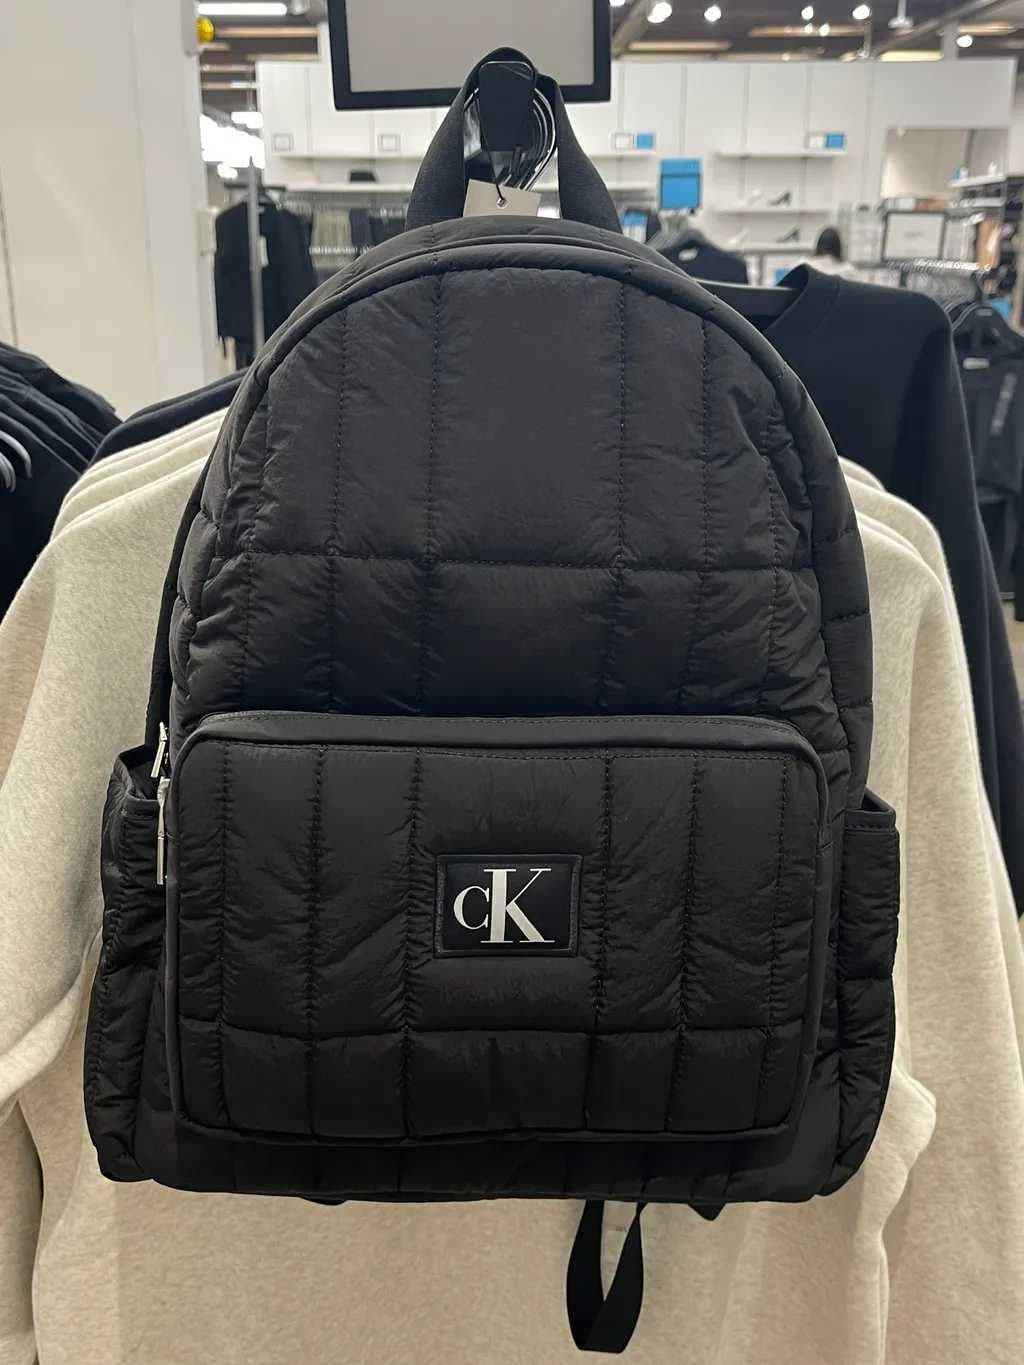 Новый рюкзак calvin klein (ck city quilted campus backpack) с америки